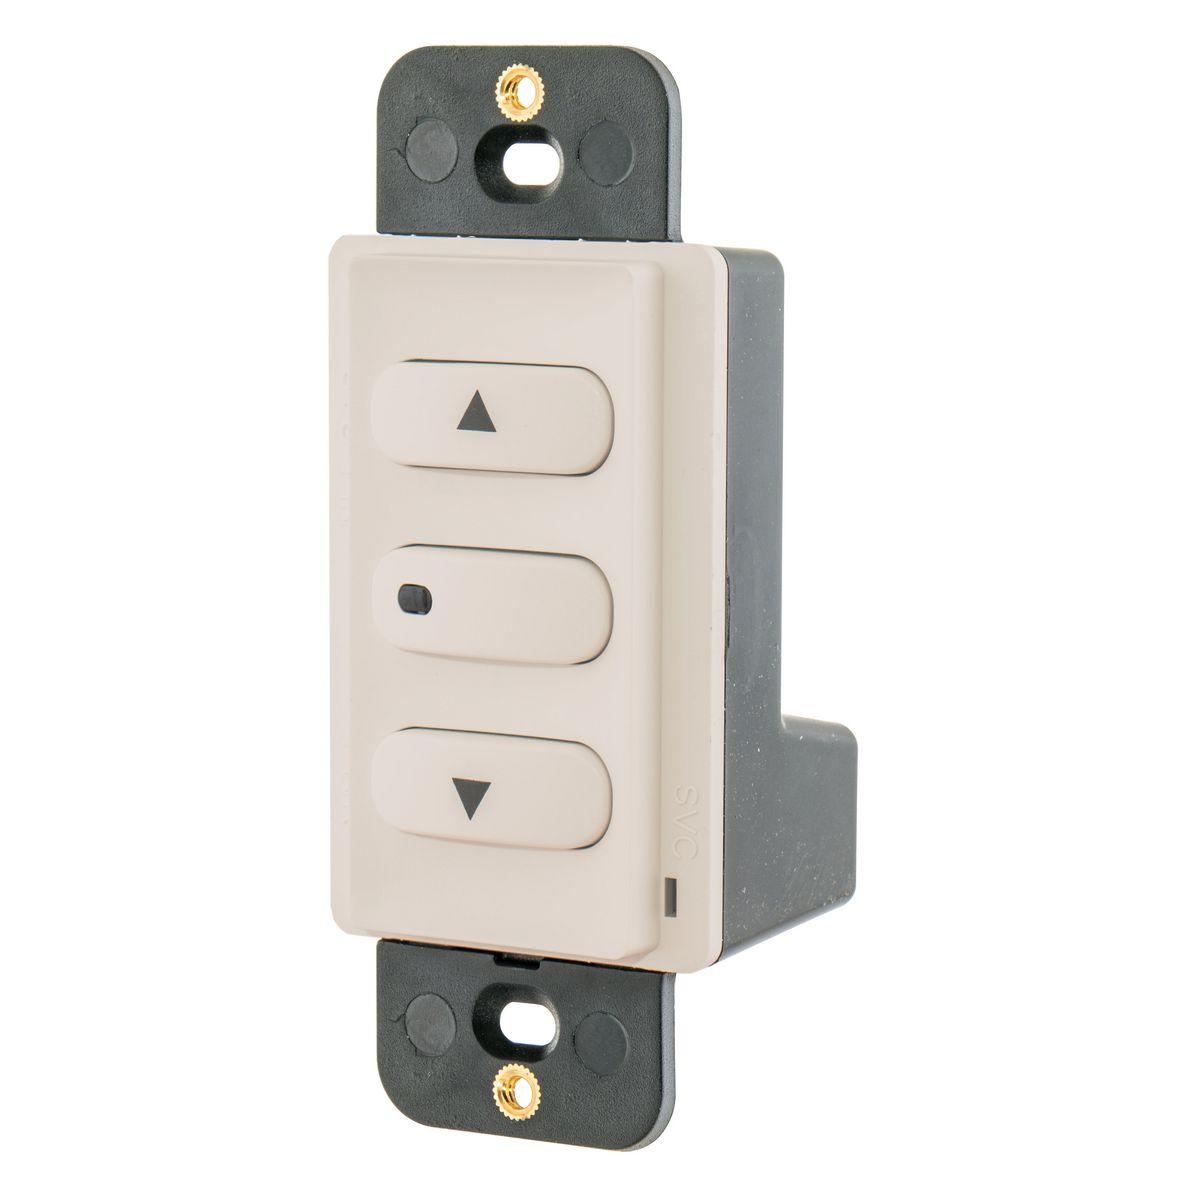 Hubbell DSM010LA Switches and Lighting Control, DimmingSwitch, Low Voltage, Momentary, 0-10V DC, Light Almond 